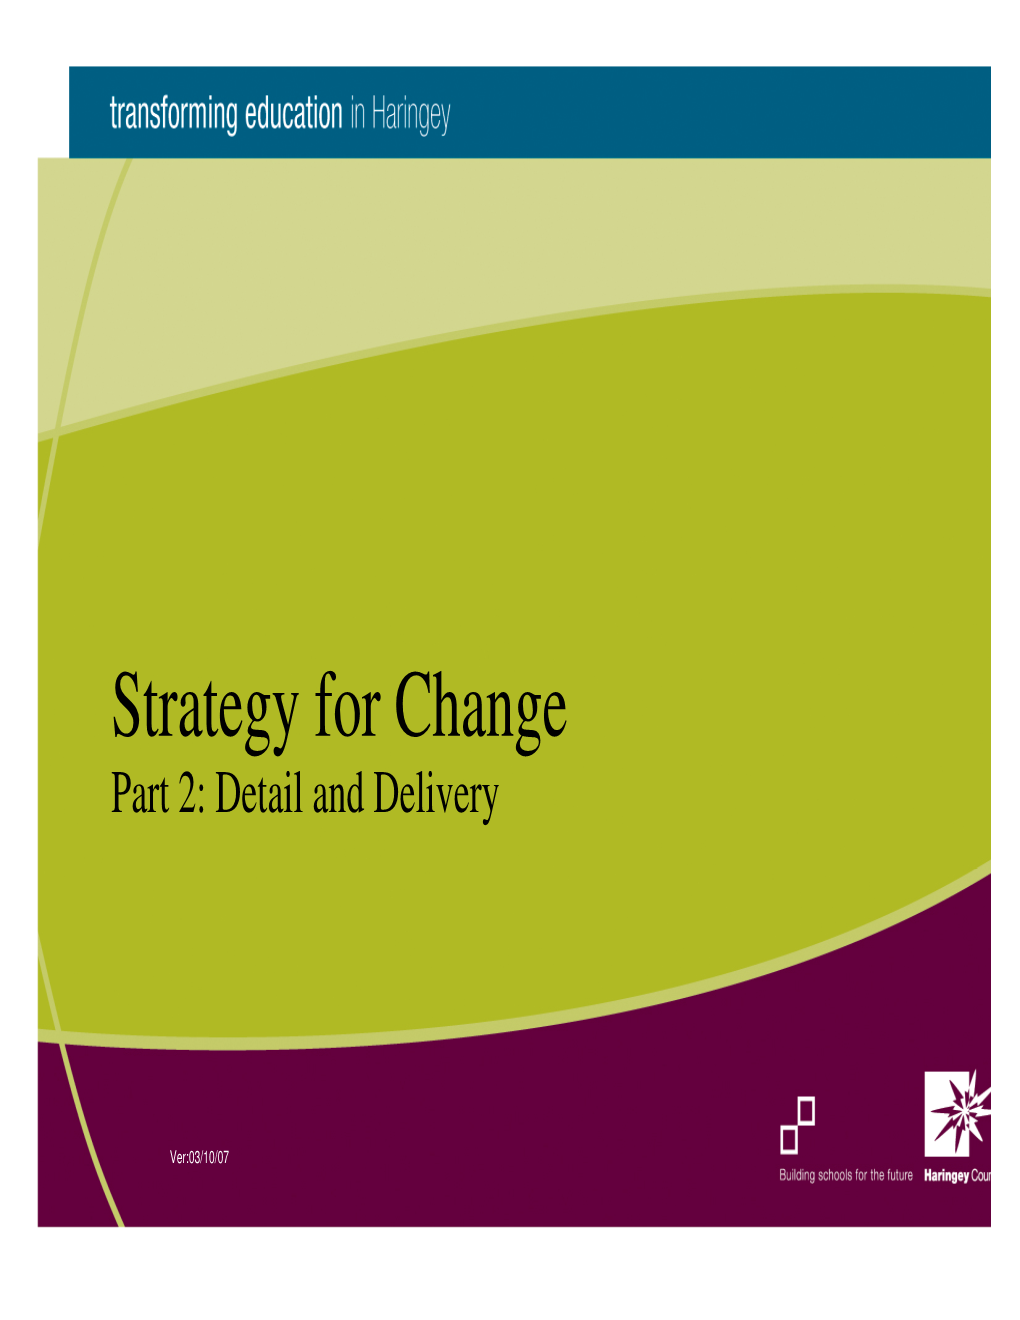 Strategy for Change Part 2: Detail and Delivery